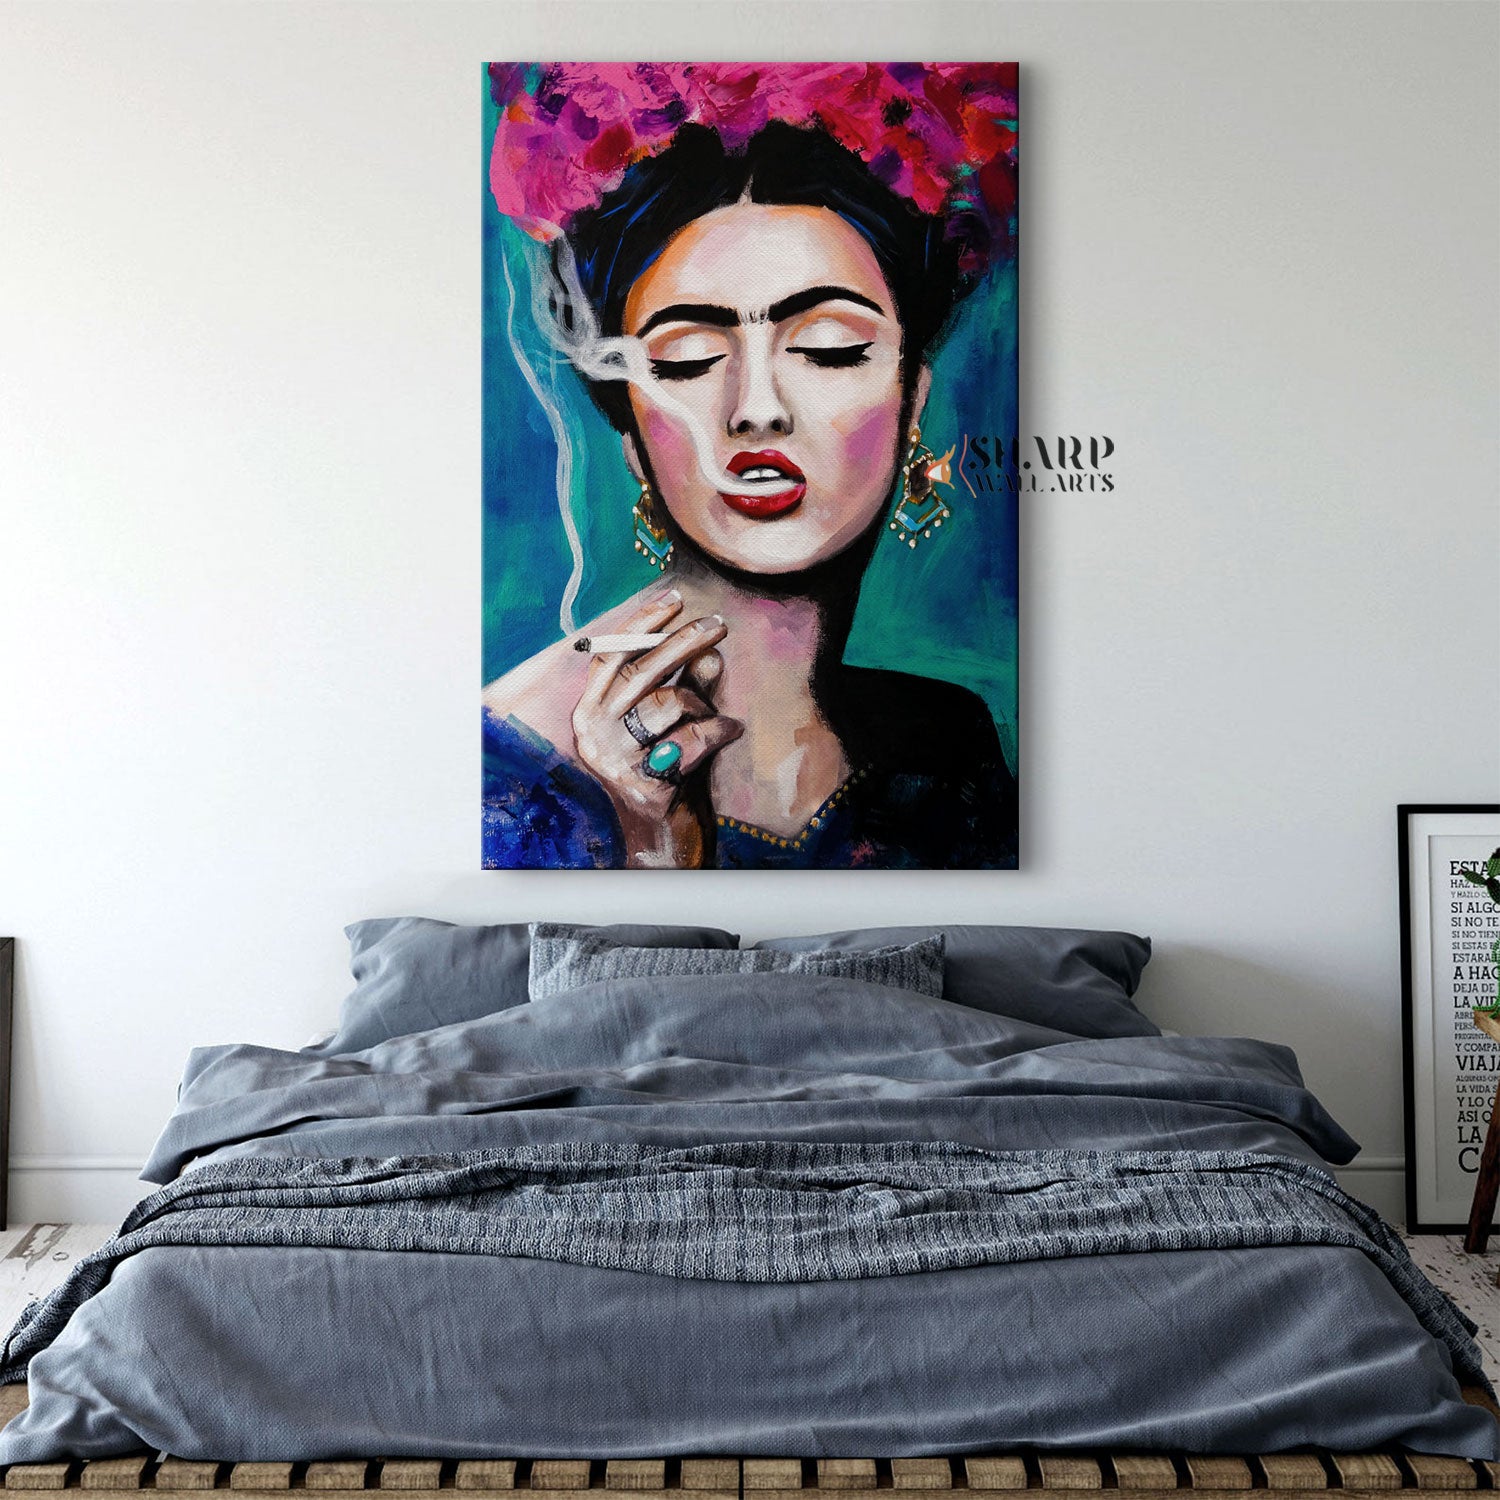 Frida Kahlo Smoking With Pink Flowers in Hair Canvas Wall Art